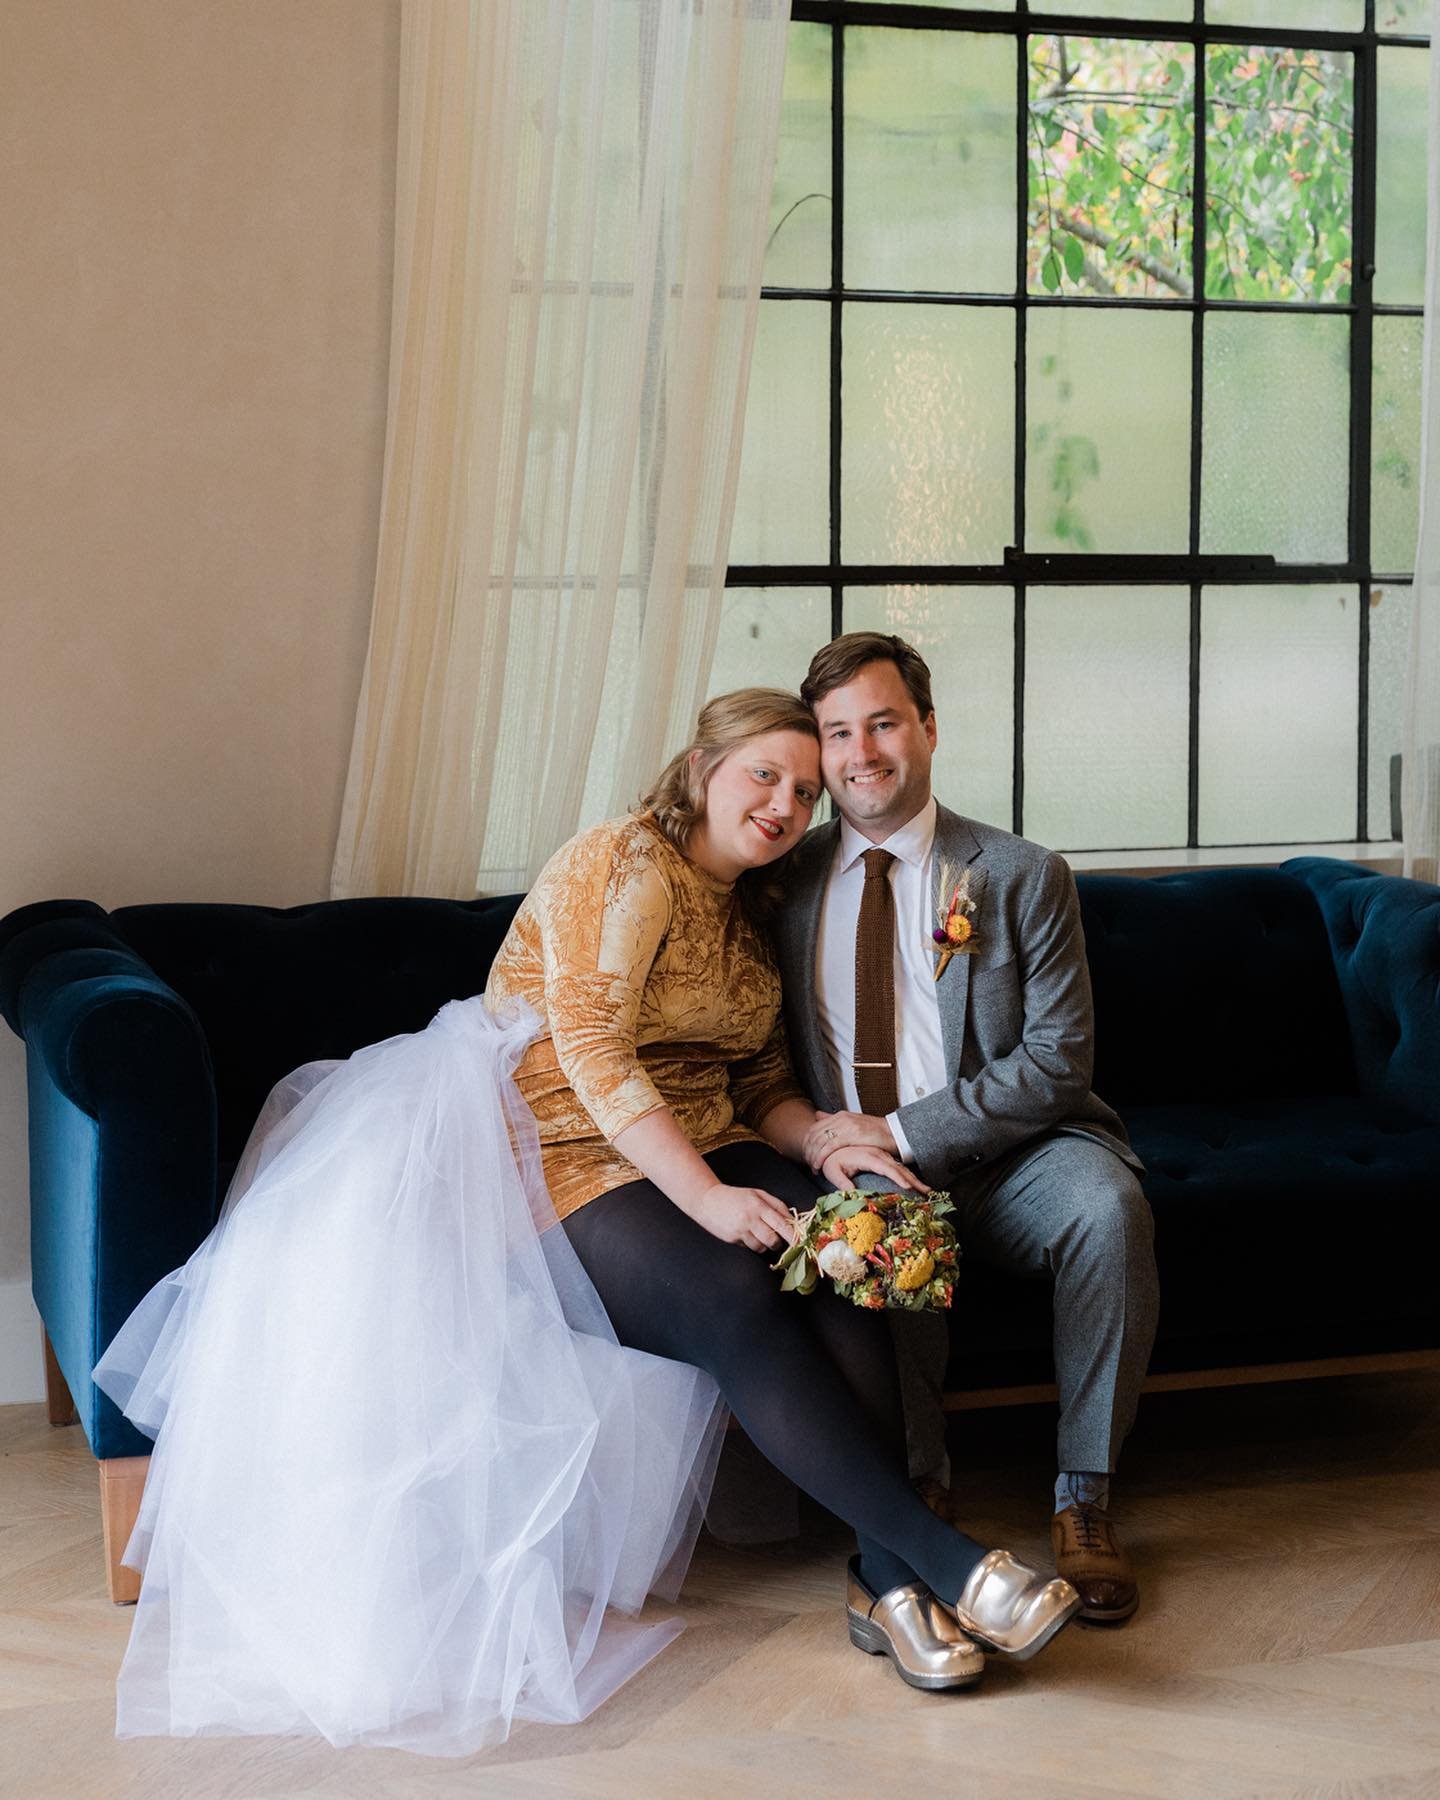 Ariana + Alex at their partnership celebration last October! I&rsquo;m thinking about that blue couch and perfect window in the FAR library today 🌿🦋

Venue, @farweddingsandevents 
Flowers, 💐 @harvestmoonflowerfarm 
Catering, @smallfavorsbar 🐟